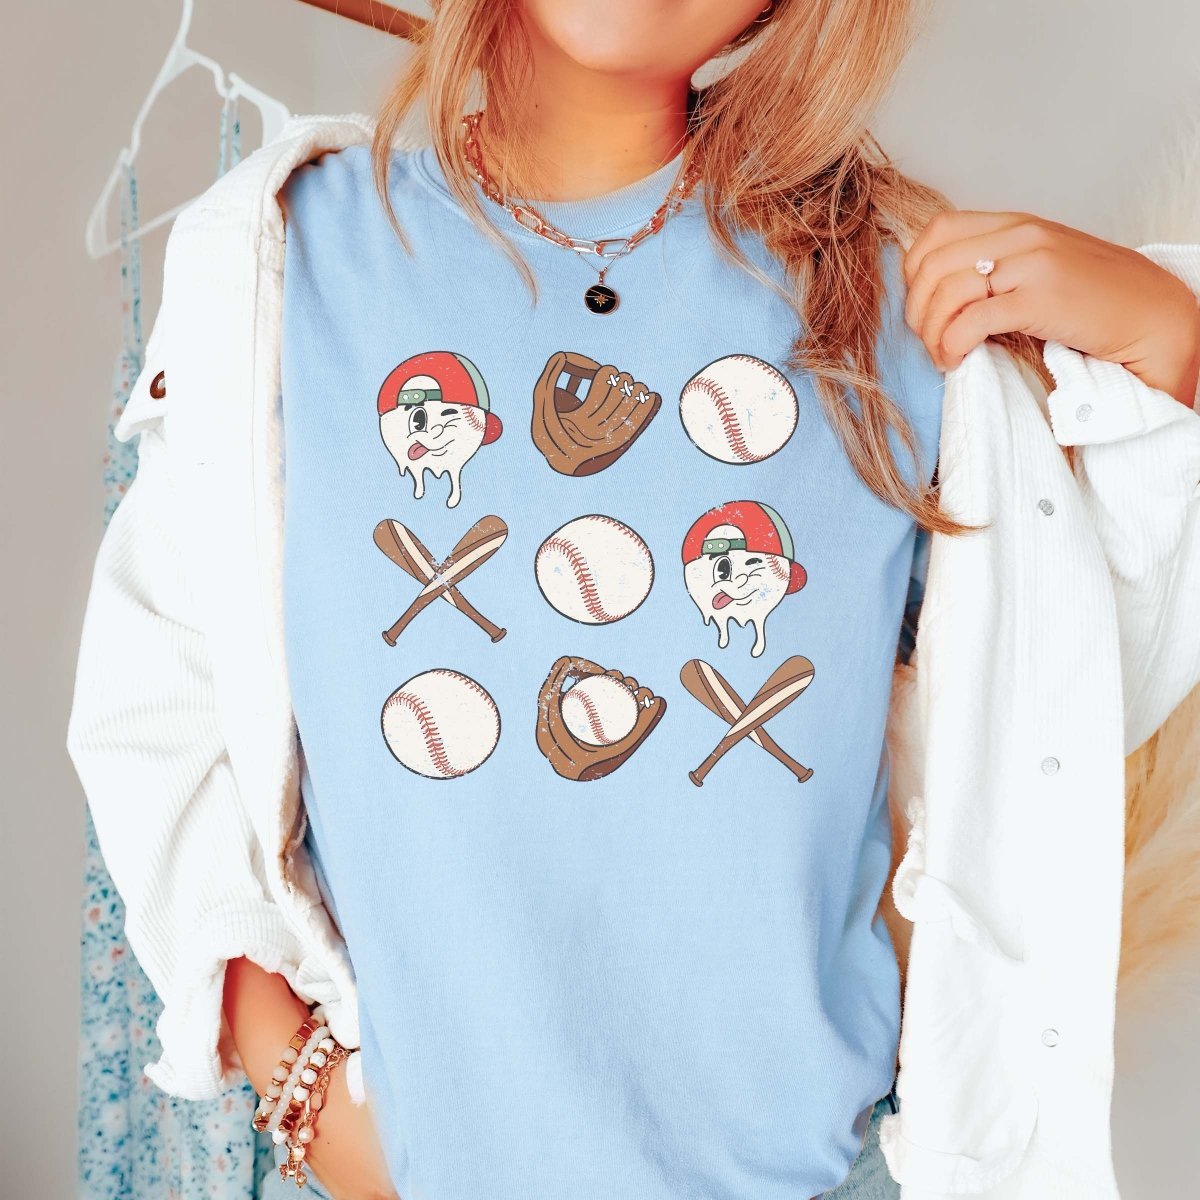 Vintage Baseball Collage Comfort Color Wholesale Tee - Fast Shipping - Limeberry Designs